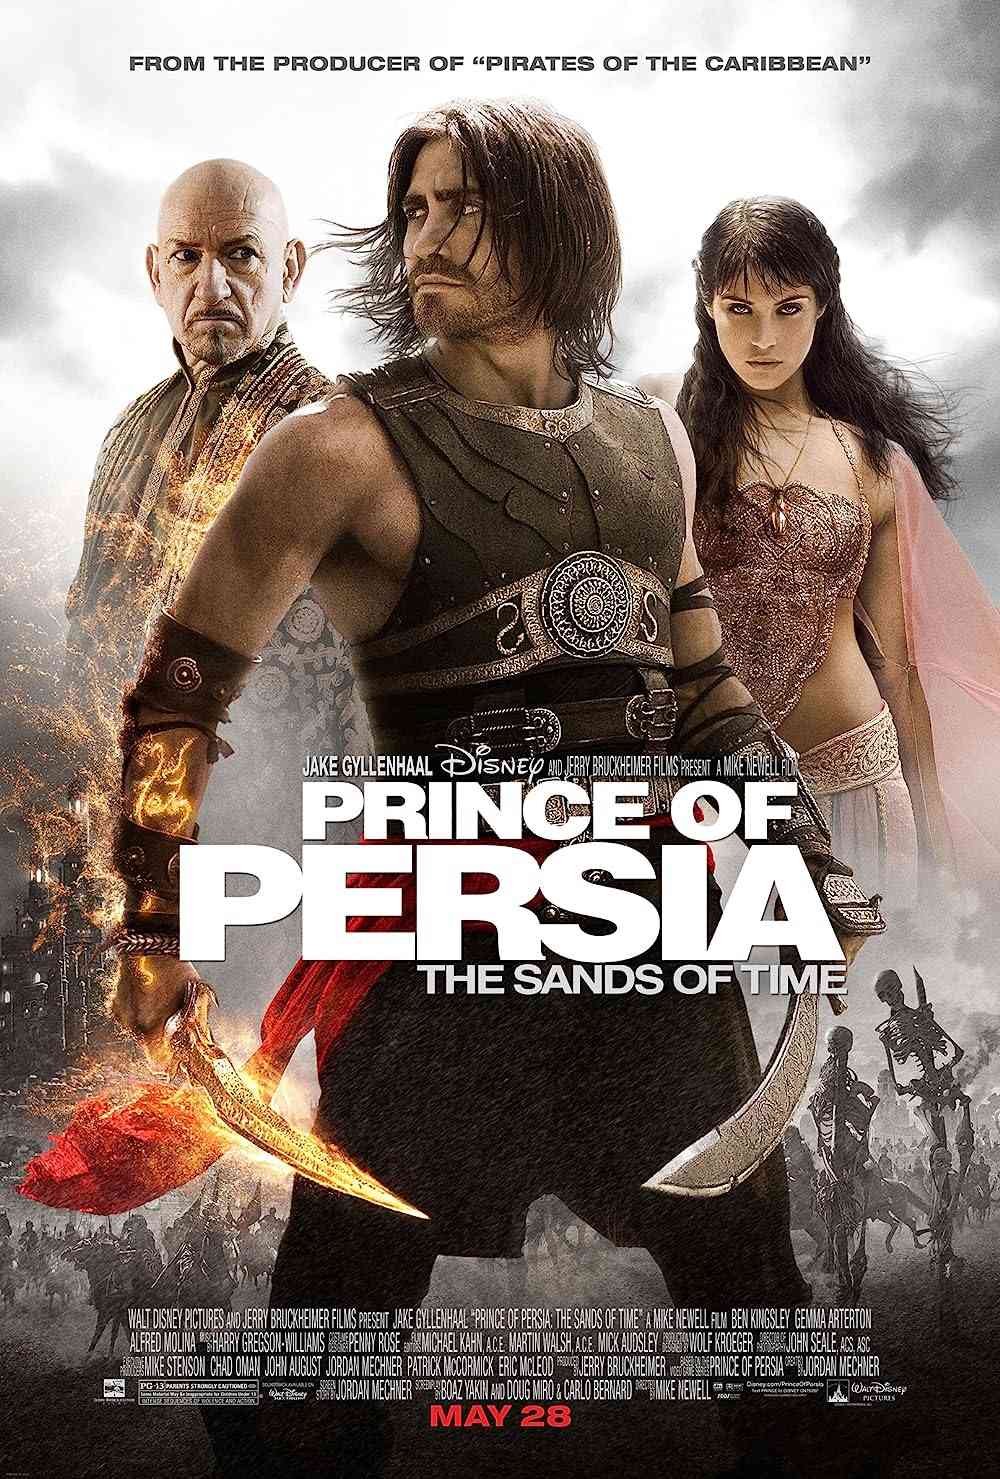 FULL MOVIE: Prince Of Persia: The Sands Of Time (2010)